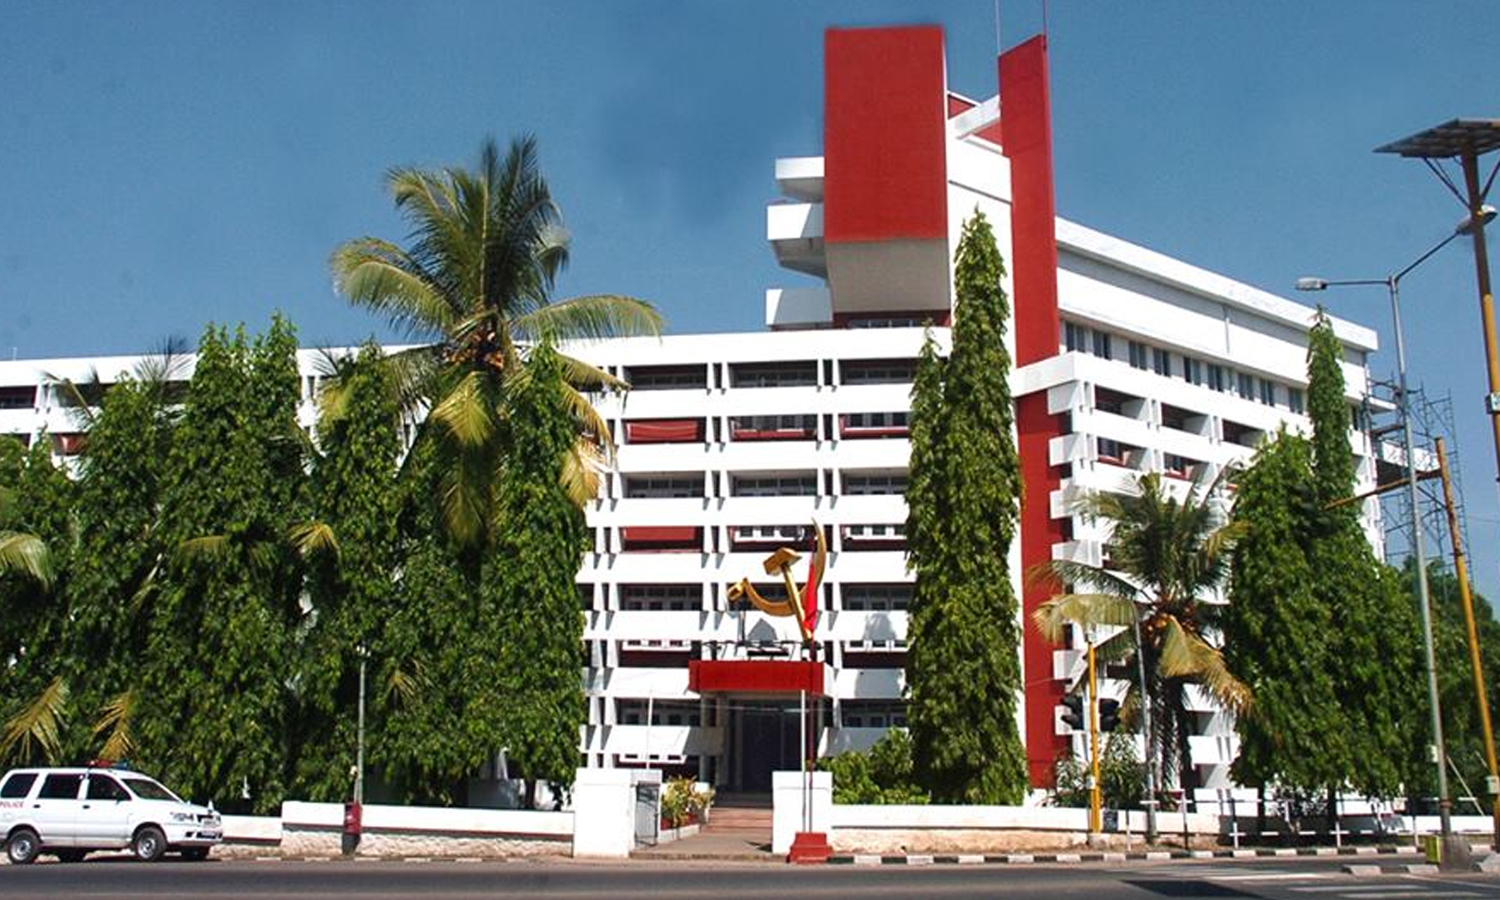 AKG Centre, the state headquarters of CPI (M) in Kerala. Photo: Supplied.